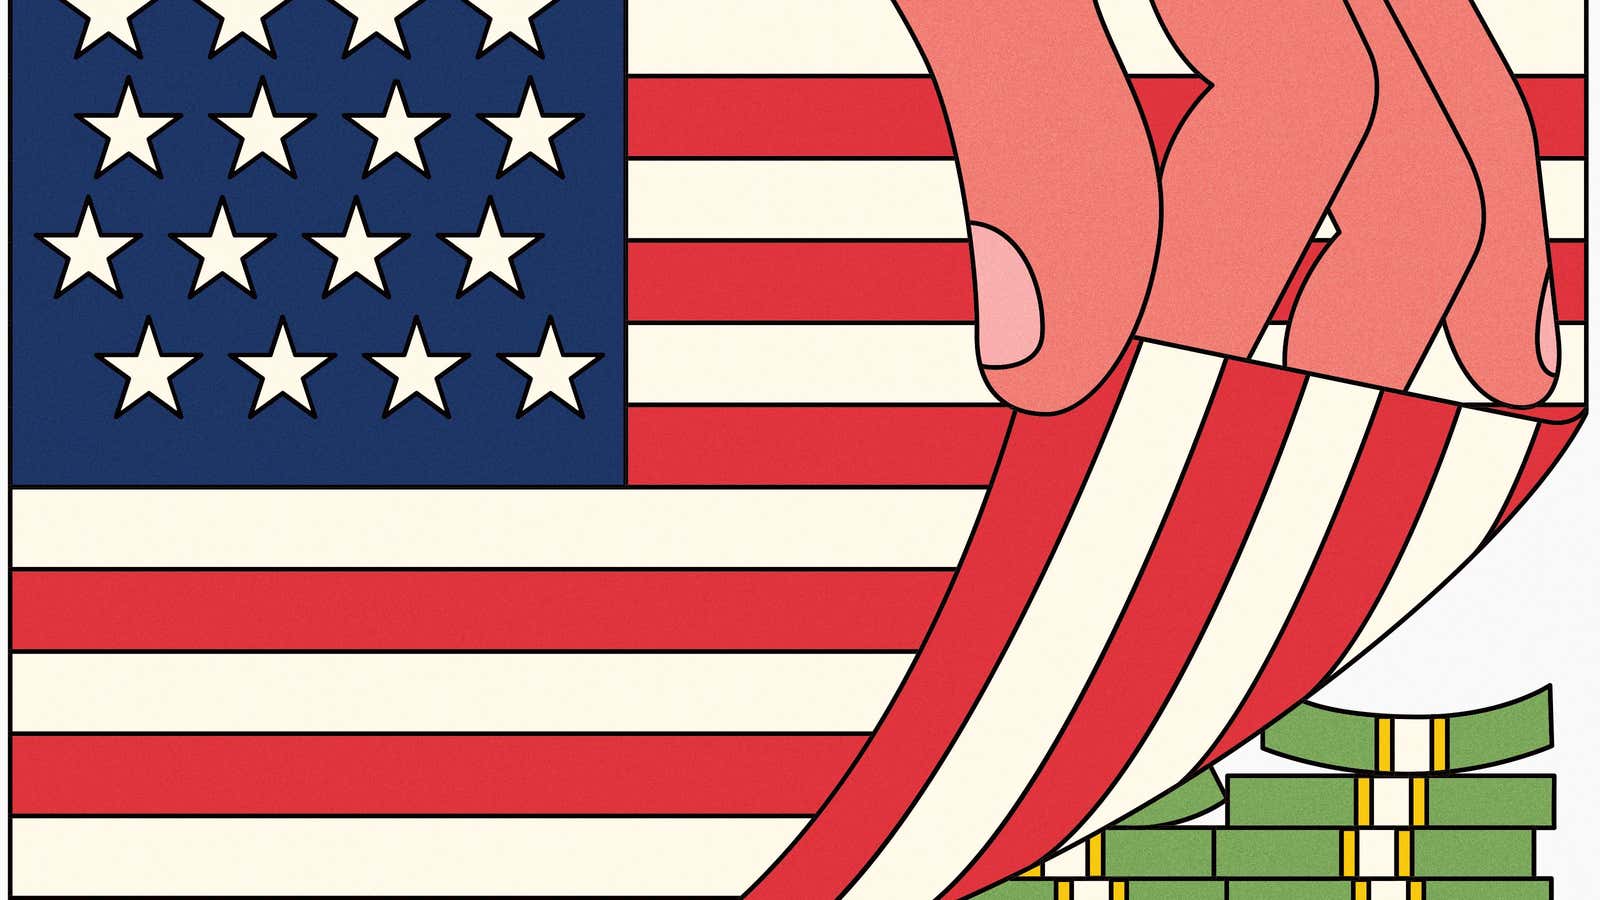 Welcome to the world’s biggest tax haven: The United States of America